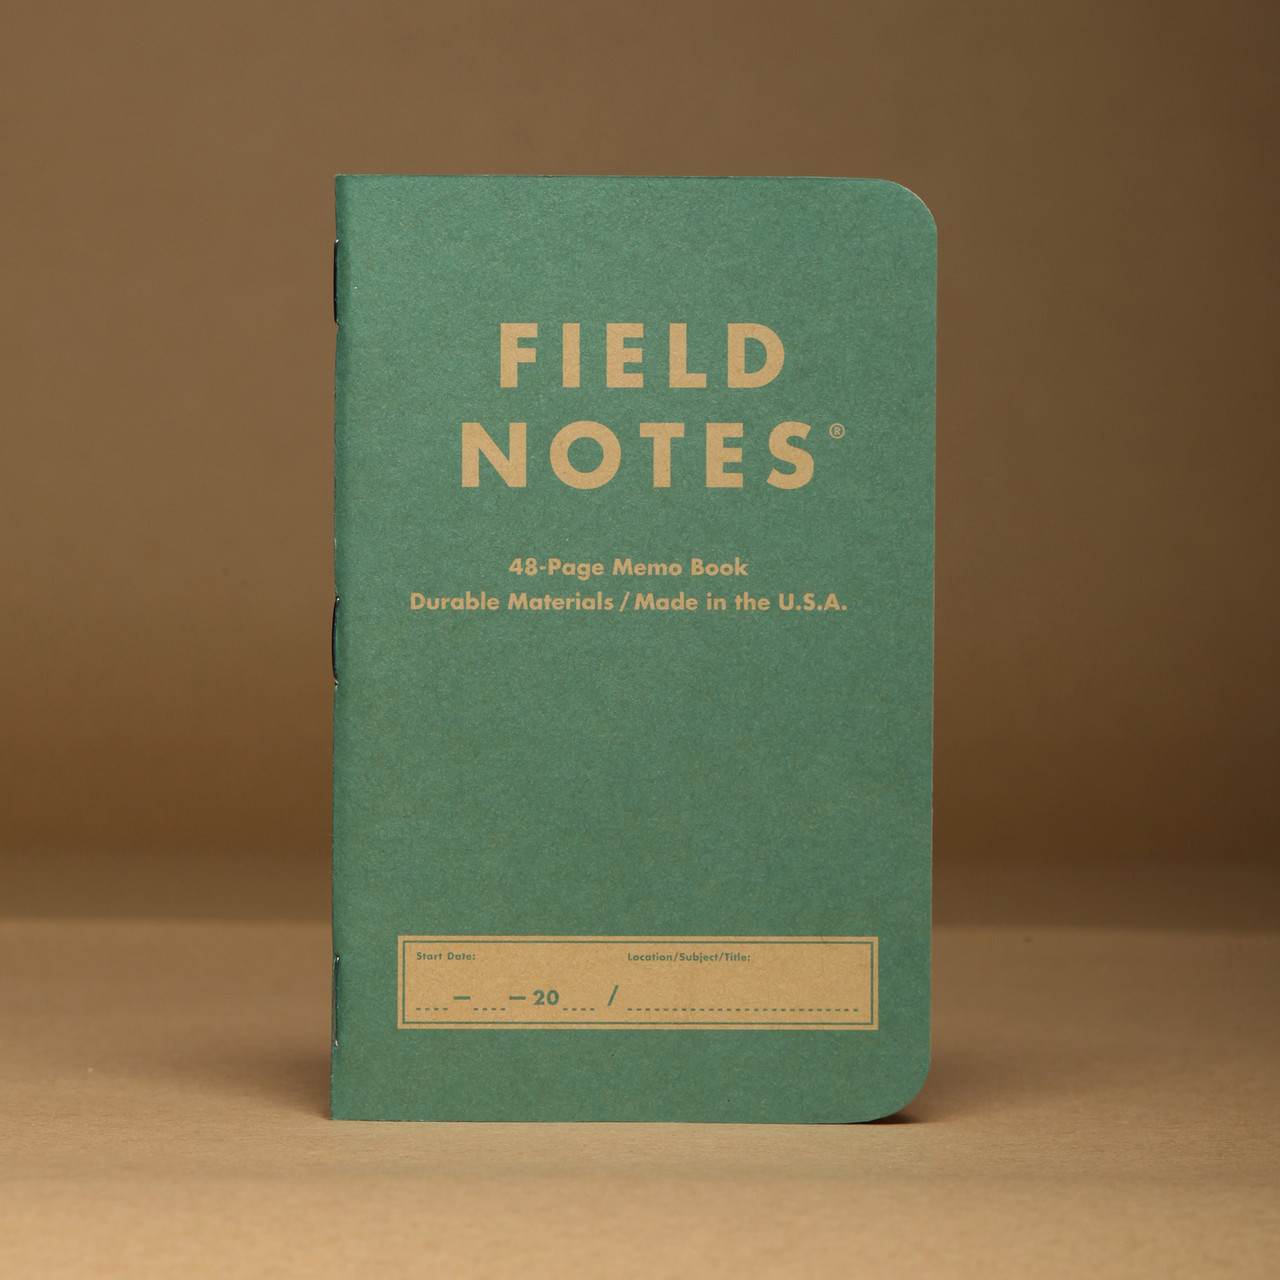 Field Notes Pitch Black Dot-Graph 2 Pack of 4.75x7.5 Notebooks